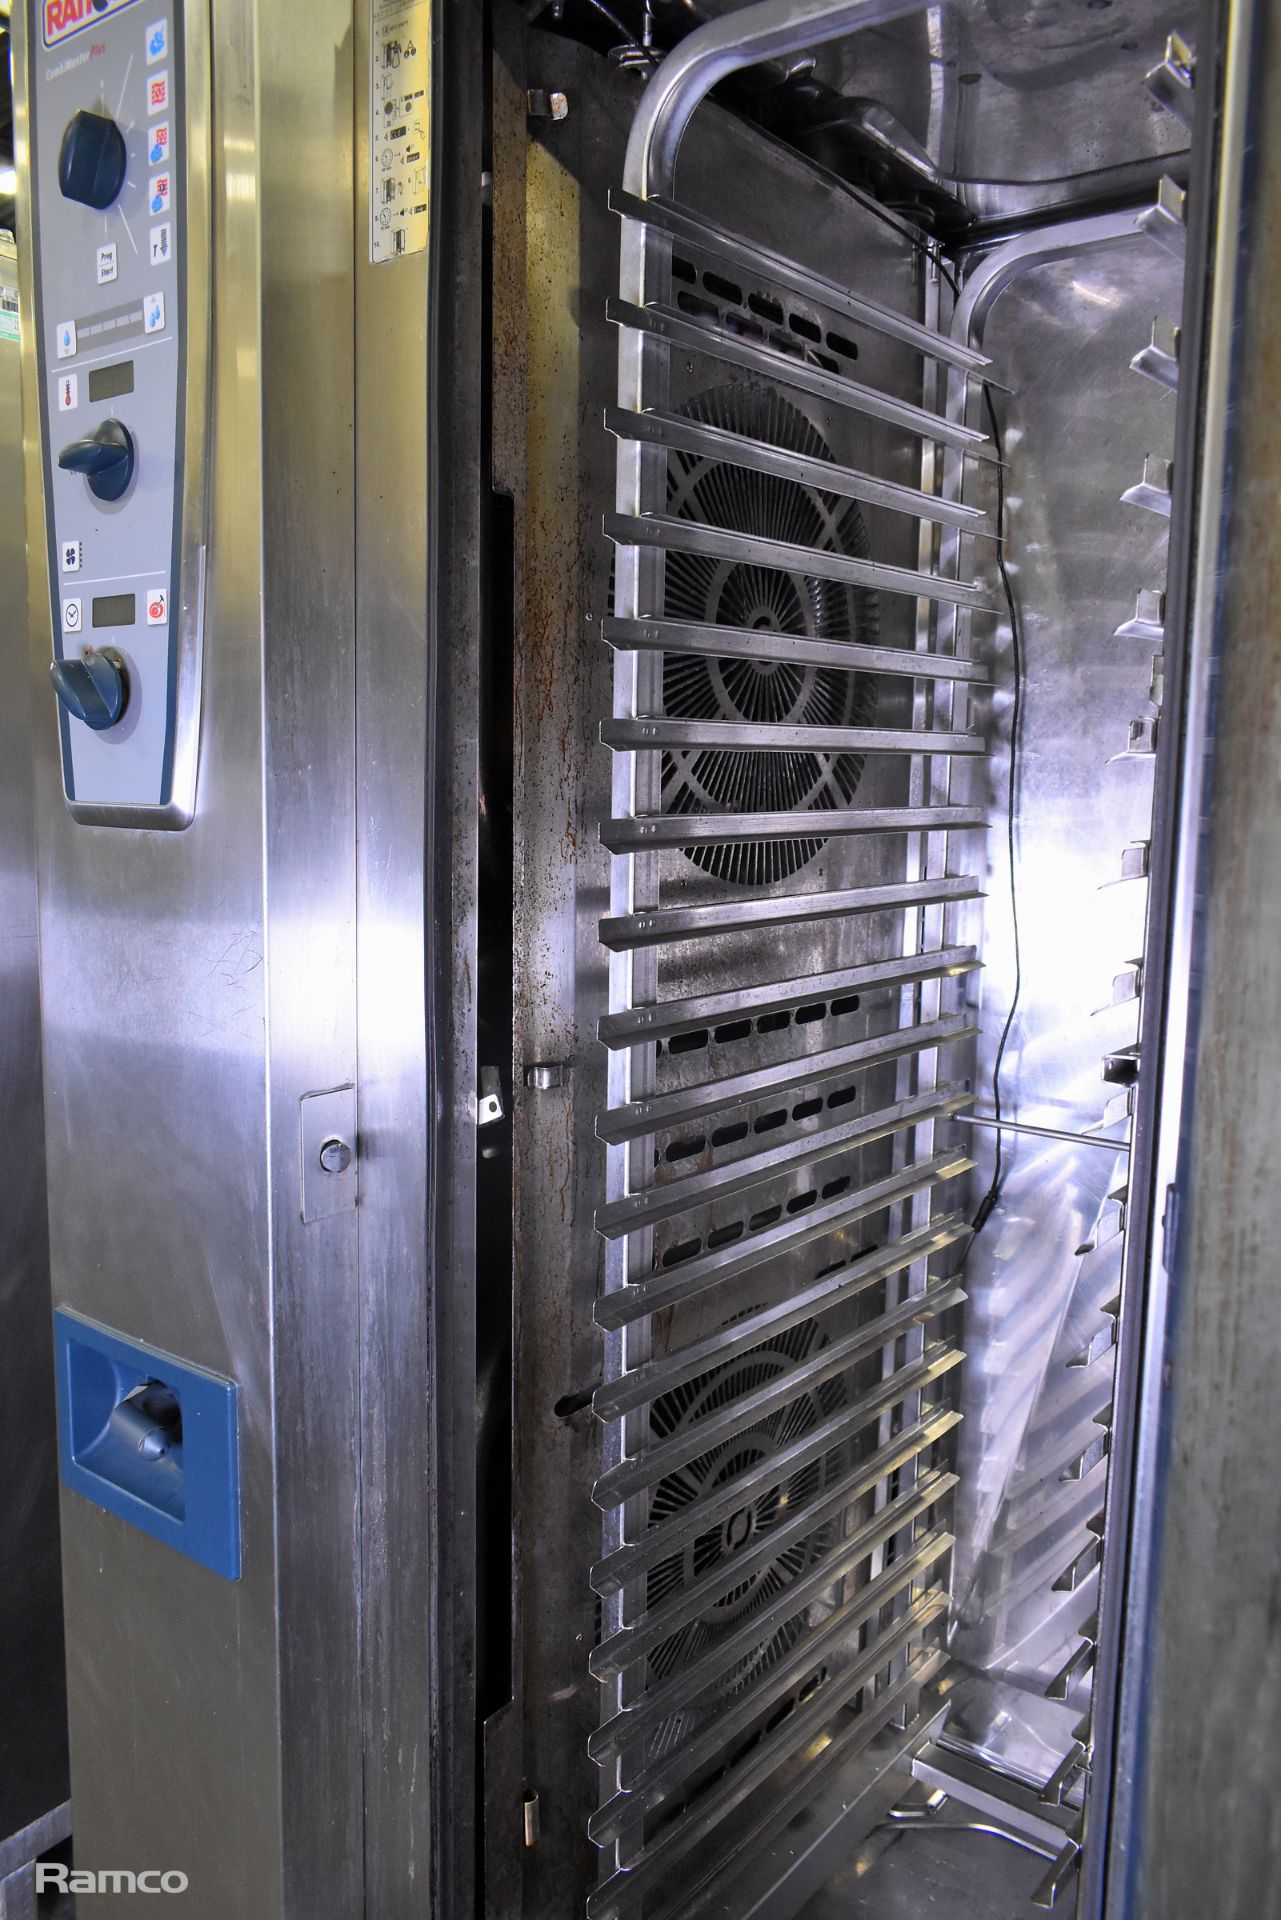 Rational CombiMaster Plus CMP 201G stainless steel 20 grid combi oven - W 880 x D 1000 x H 1850mm - Image 5 of 9